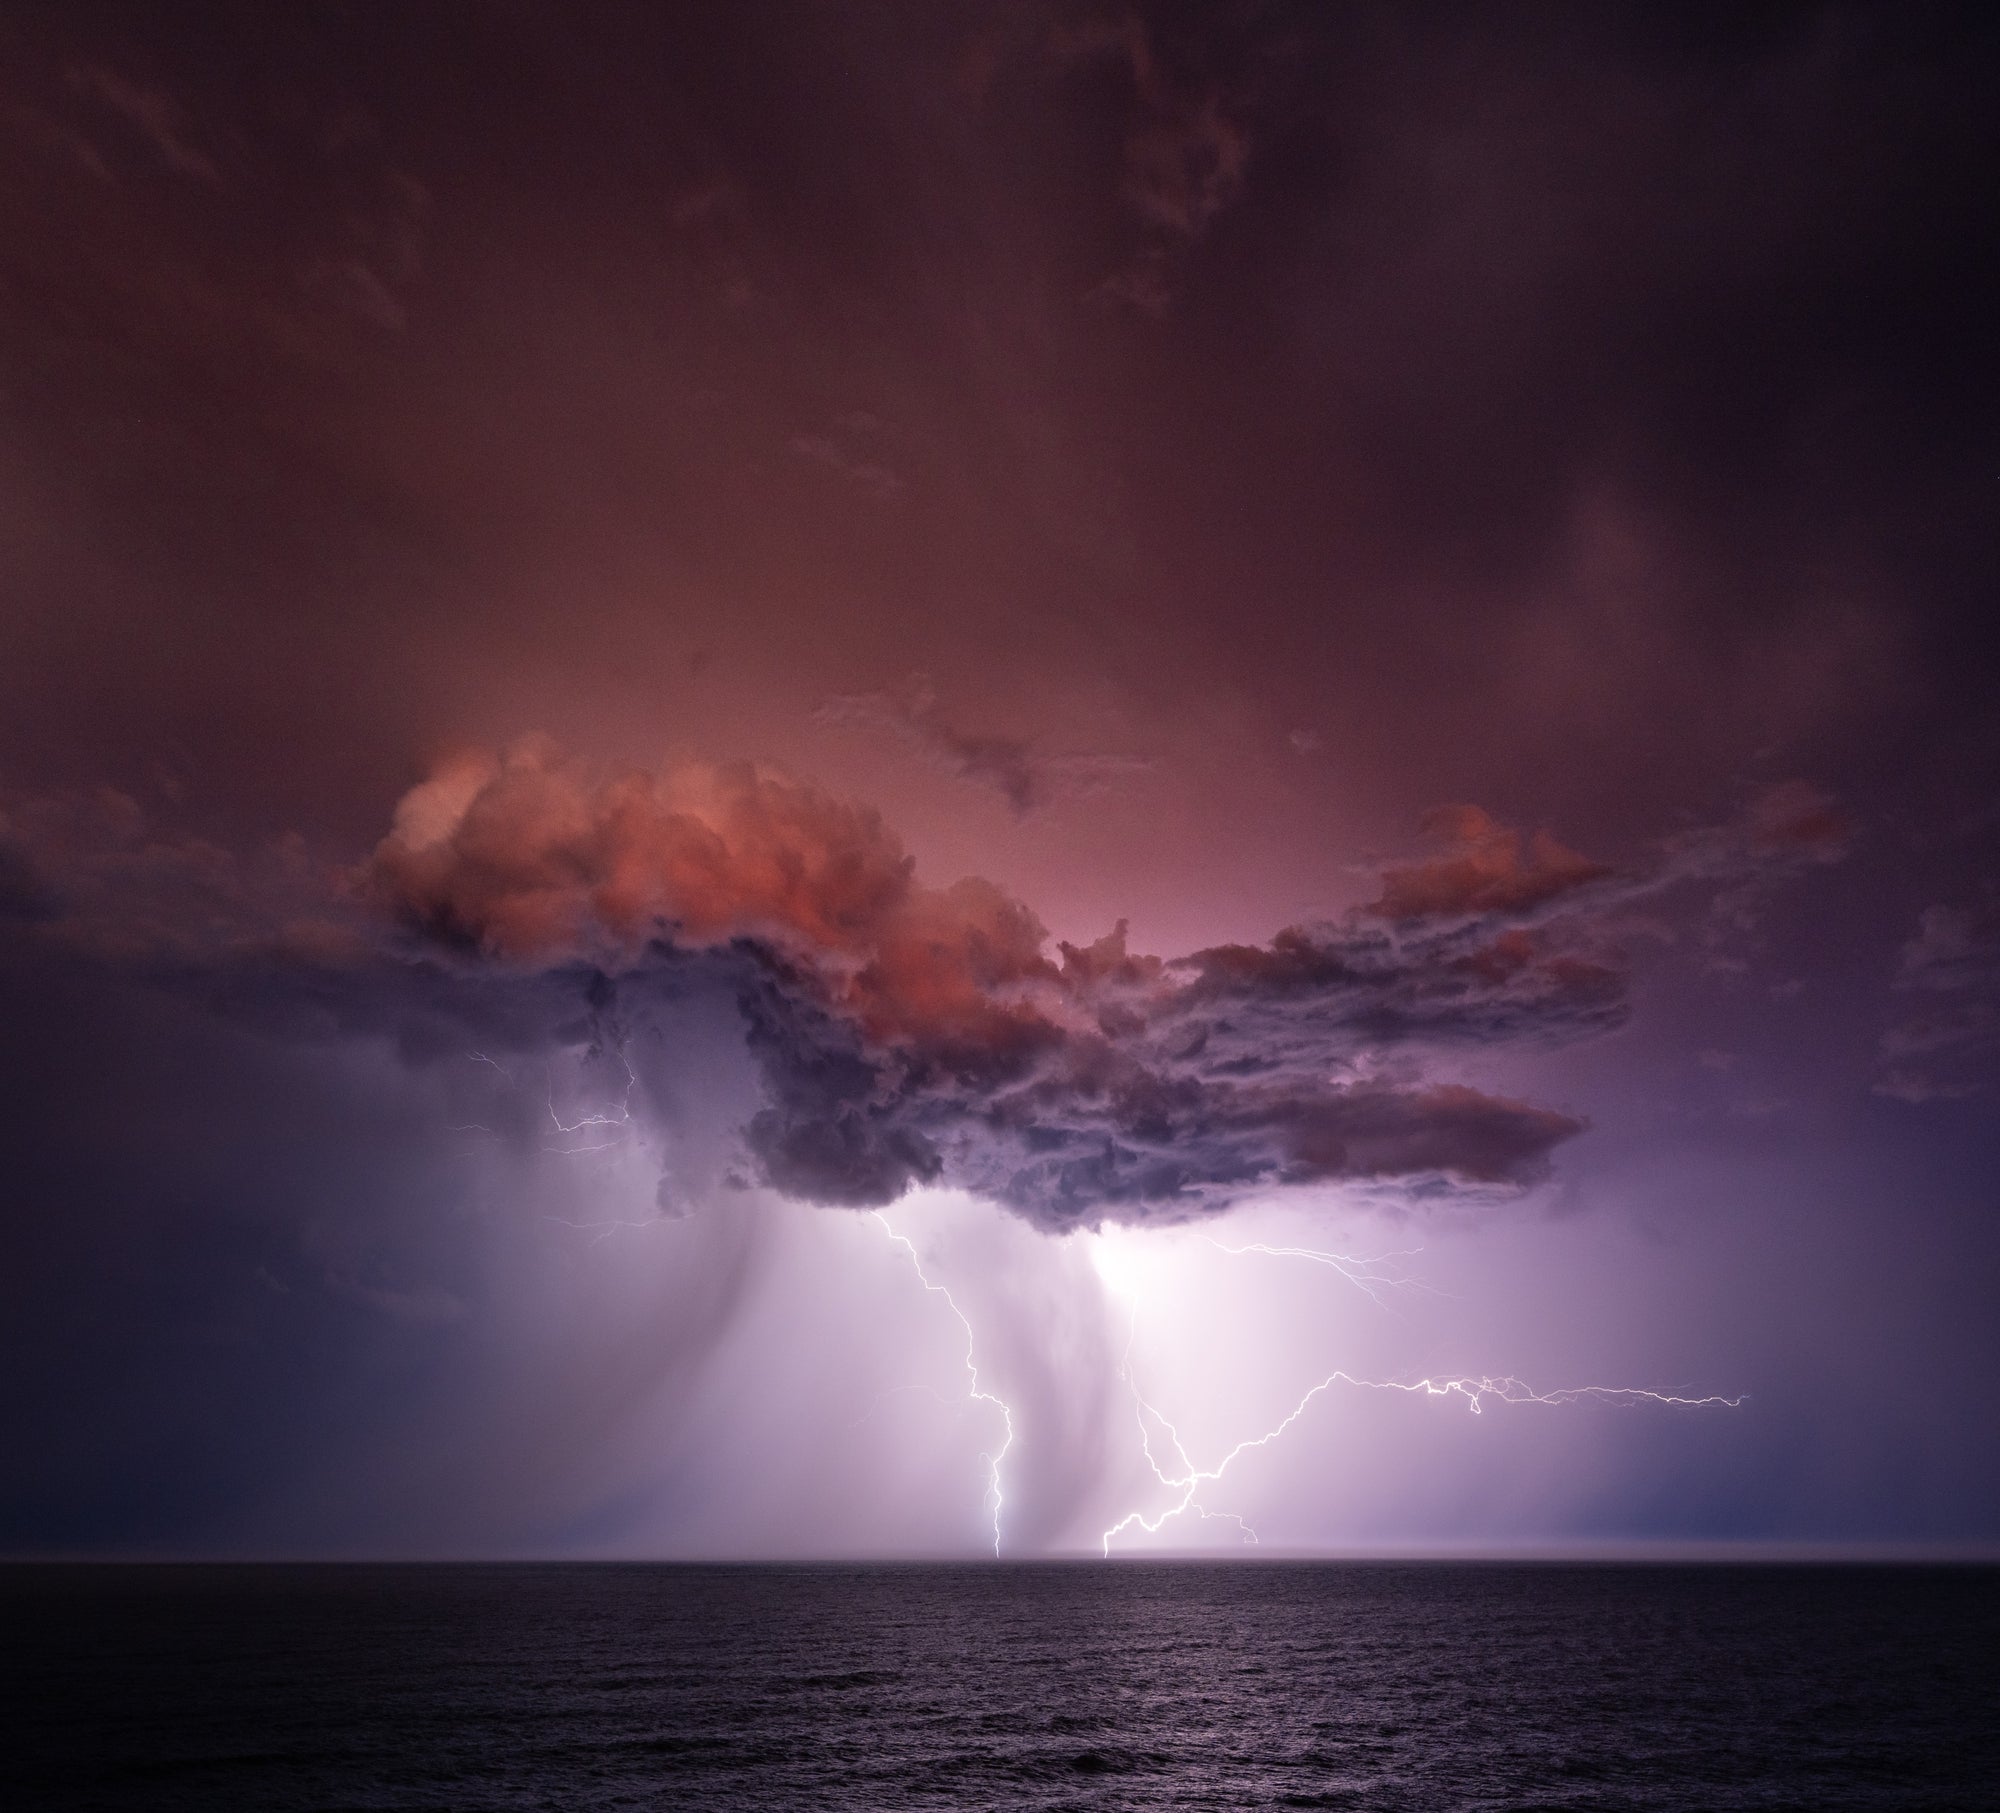 Online Photography Tutorial - Introduction to Storm Photography